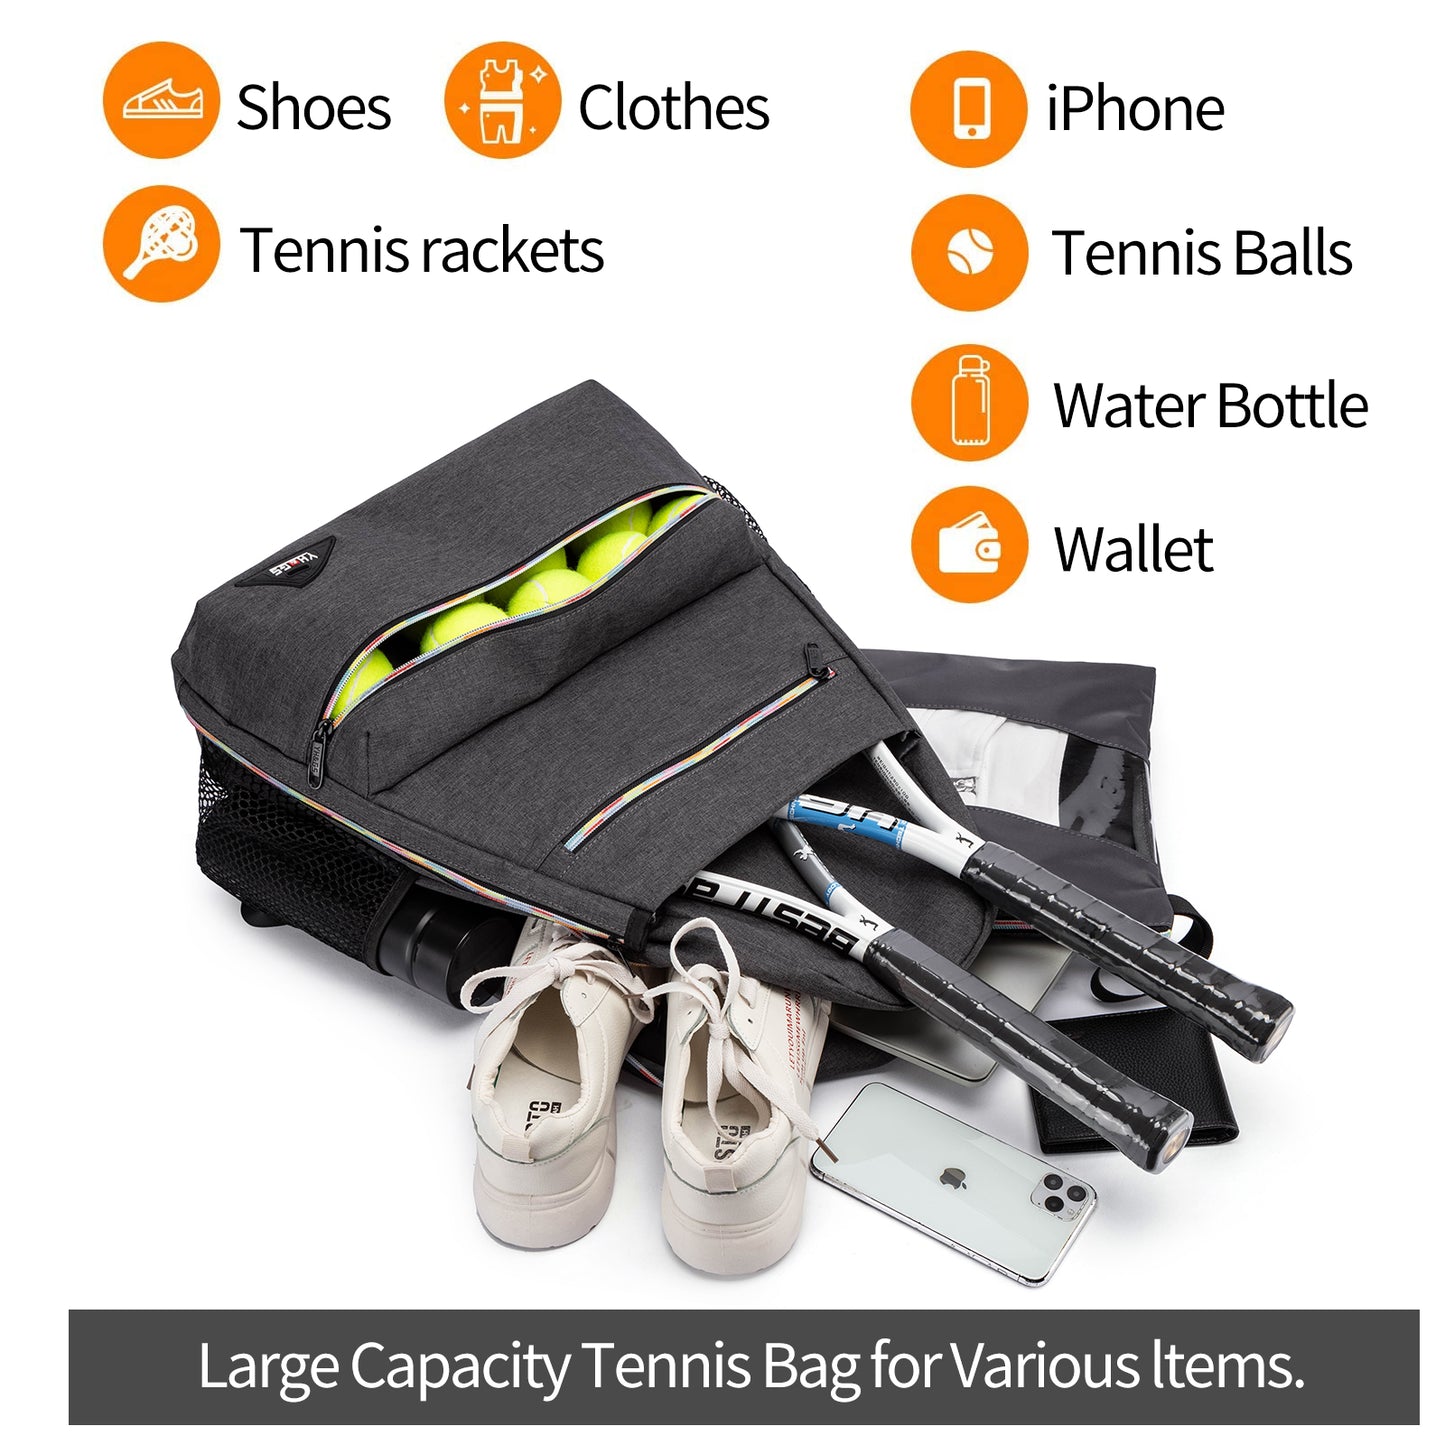 ennis Bag Tennis Backpack, Tennis Bags for Women and Men with Shoe Compartment to Hold Tennis Racket, for Pickleball Paddles, Badminton Racquet, Squash Racquet,Balls and Other Accessories